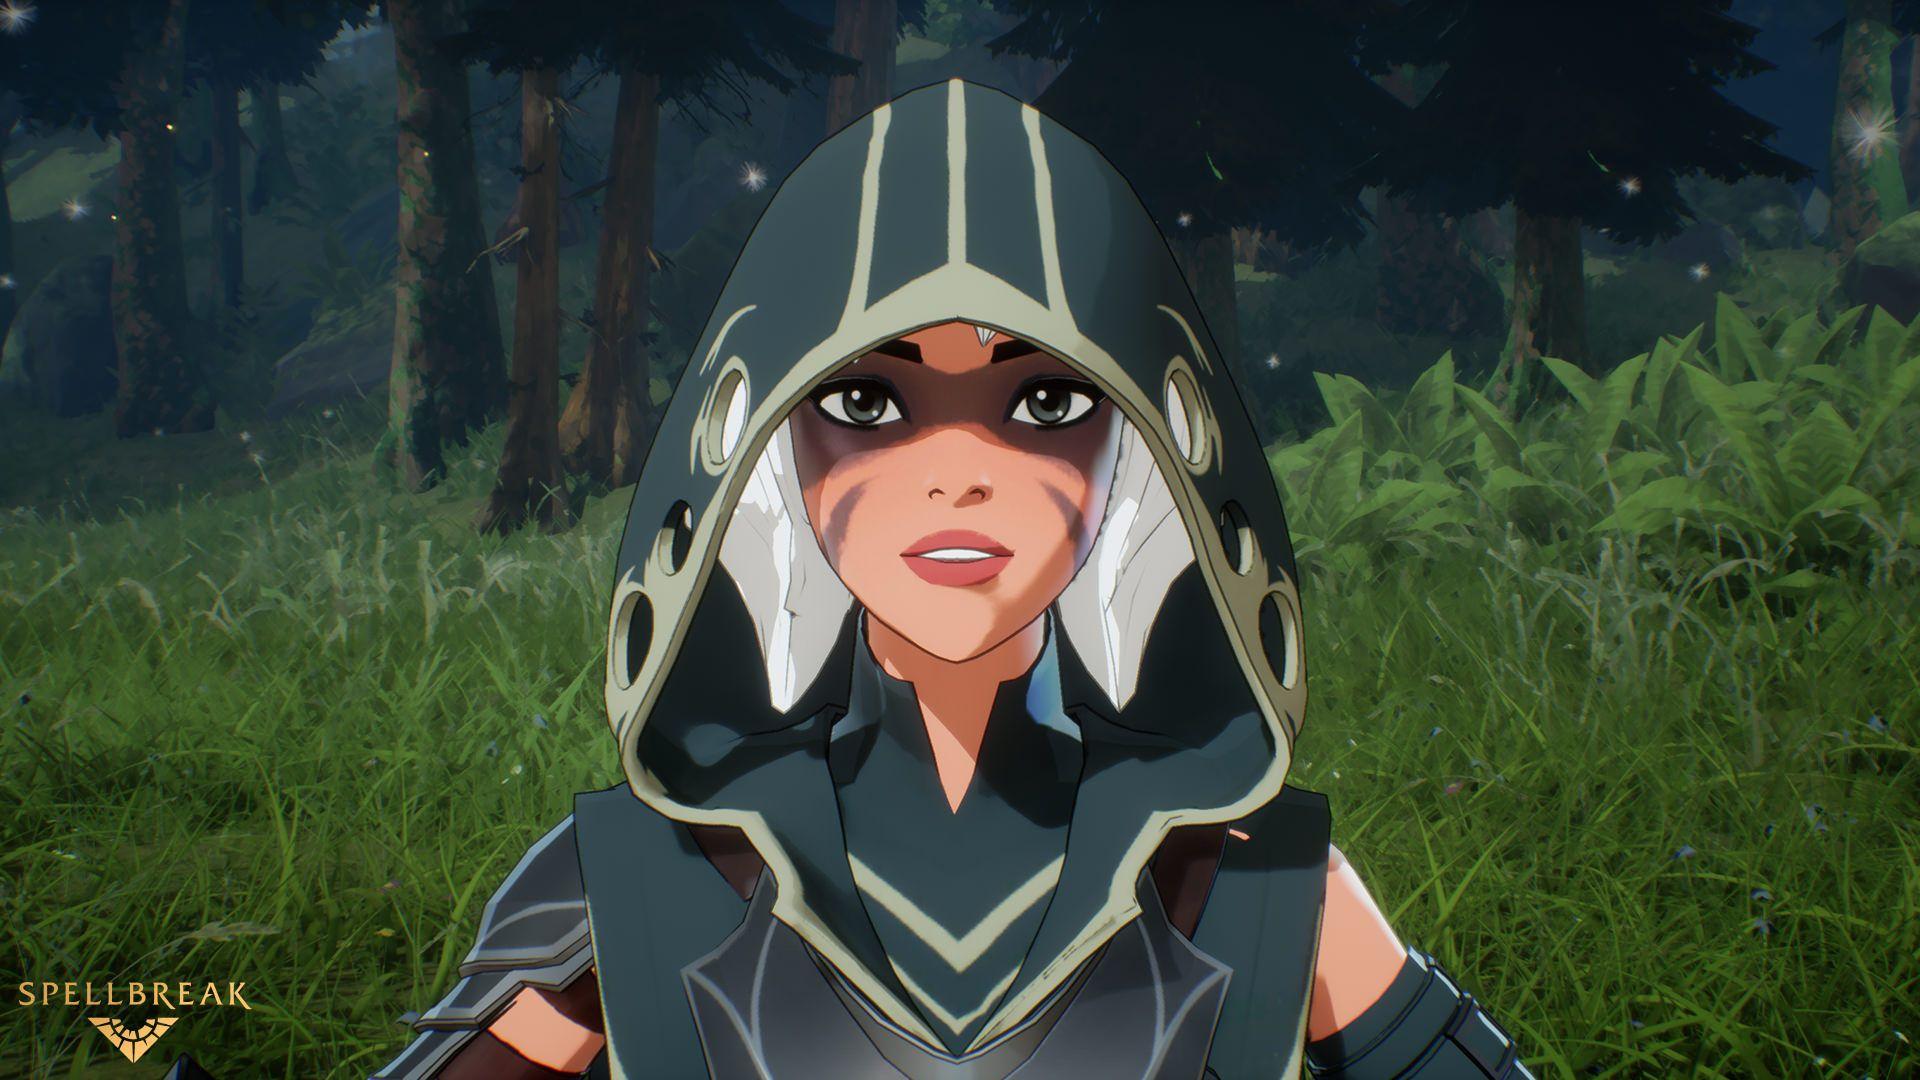 A look at Spellbreak's first character model oh, and the game has a